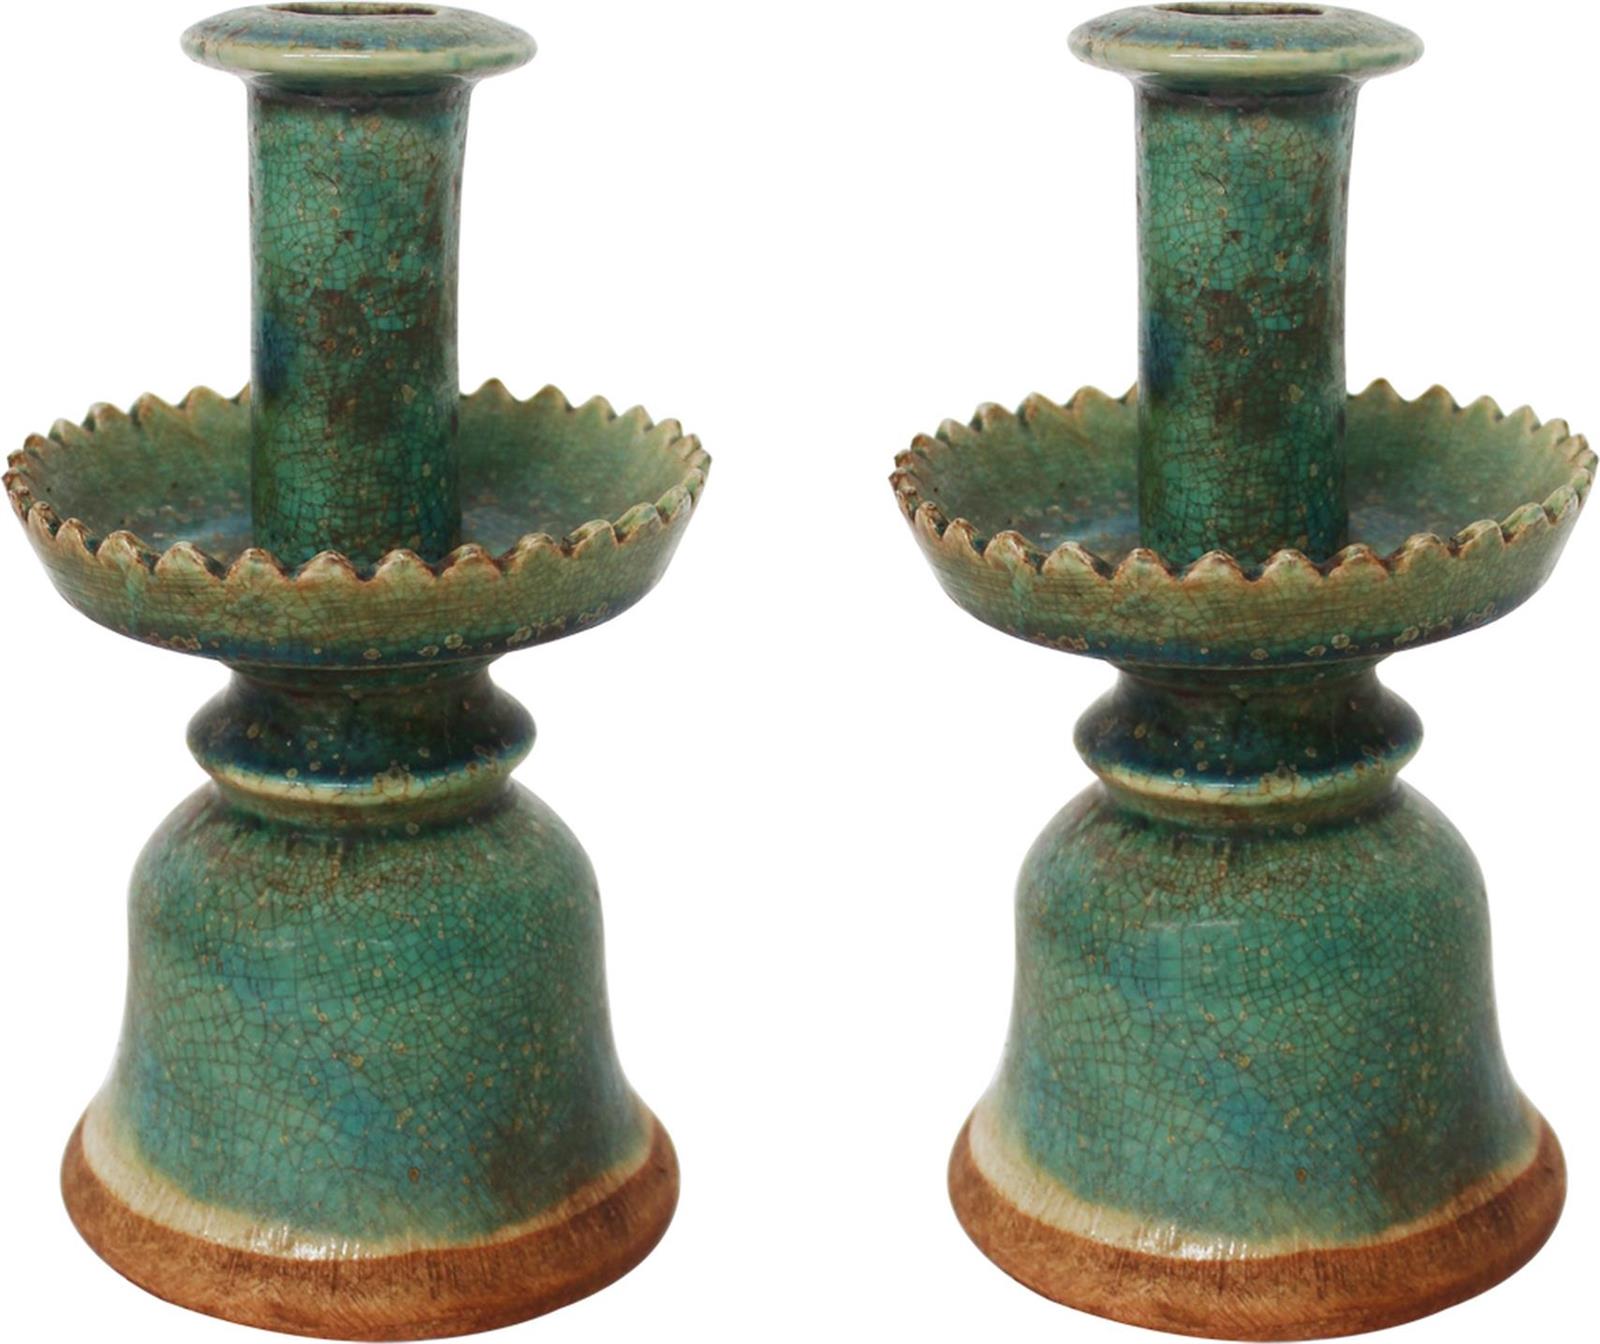 Candleholders Candleholder Candlestick Speckled Green Colors May Vary Variable-Image 2